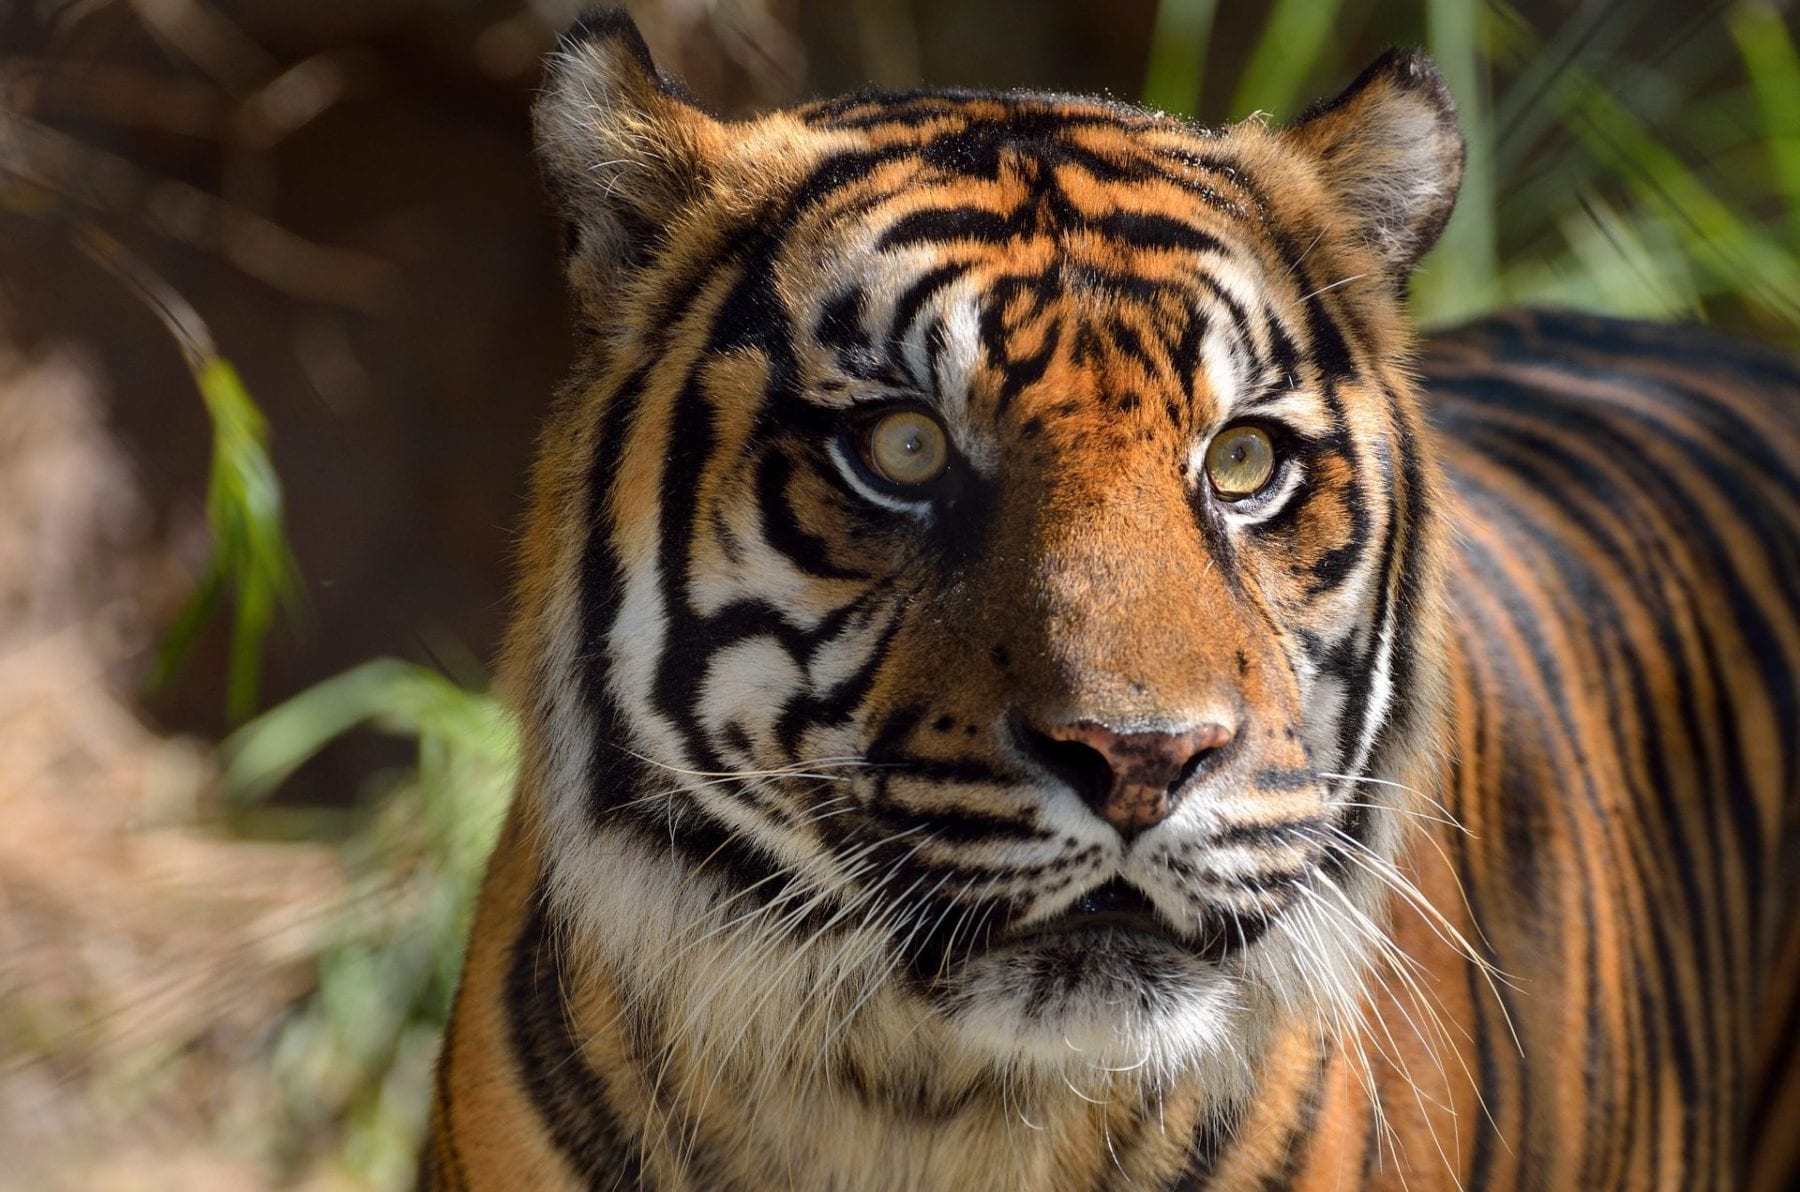 Saving the tiger with a profiling tool used to catch serial criminals